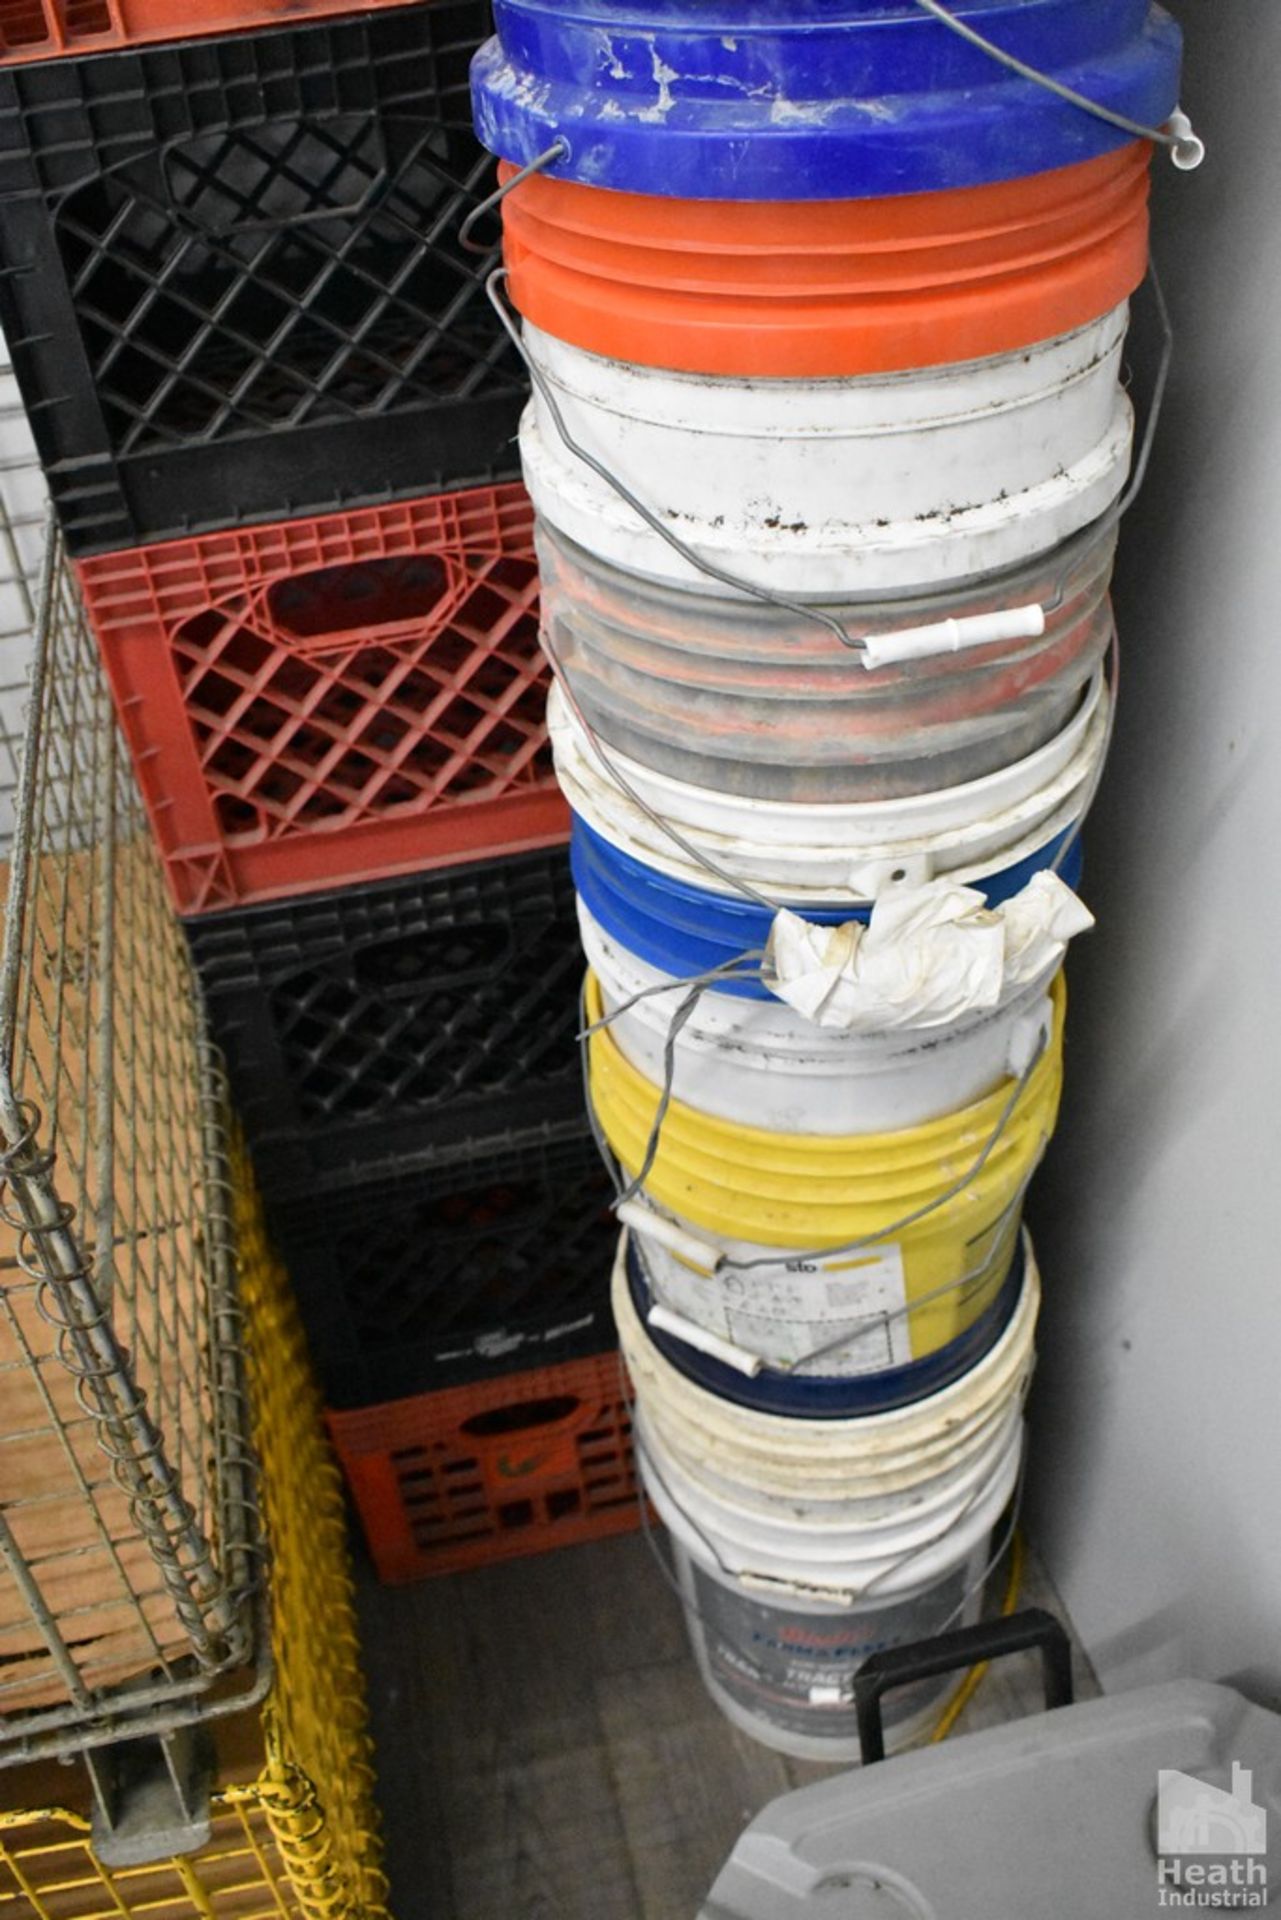 LARGE QUANTITY OF MILK CRATES AND PLASTIC BUCKETS - Image 3 of 3